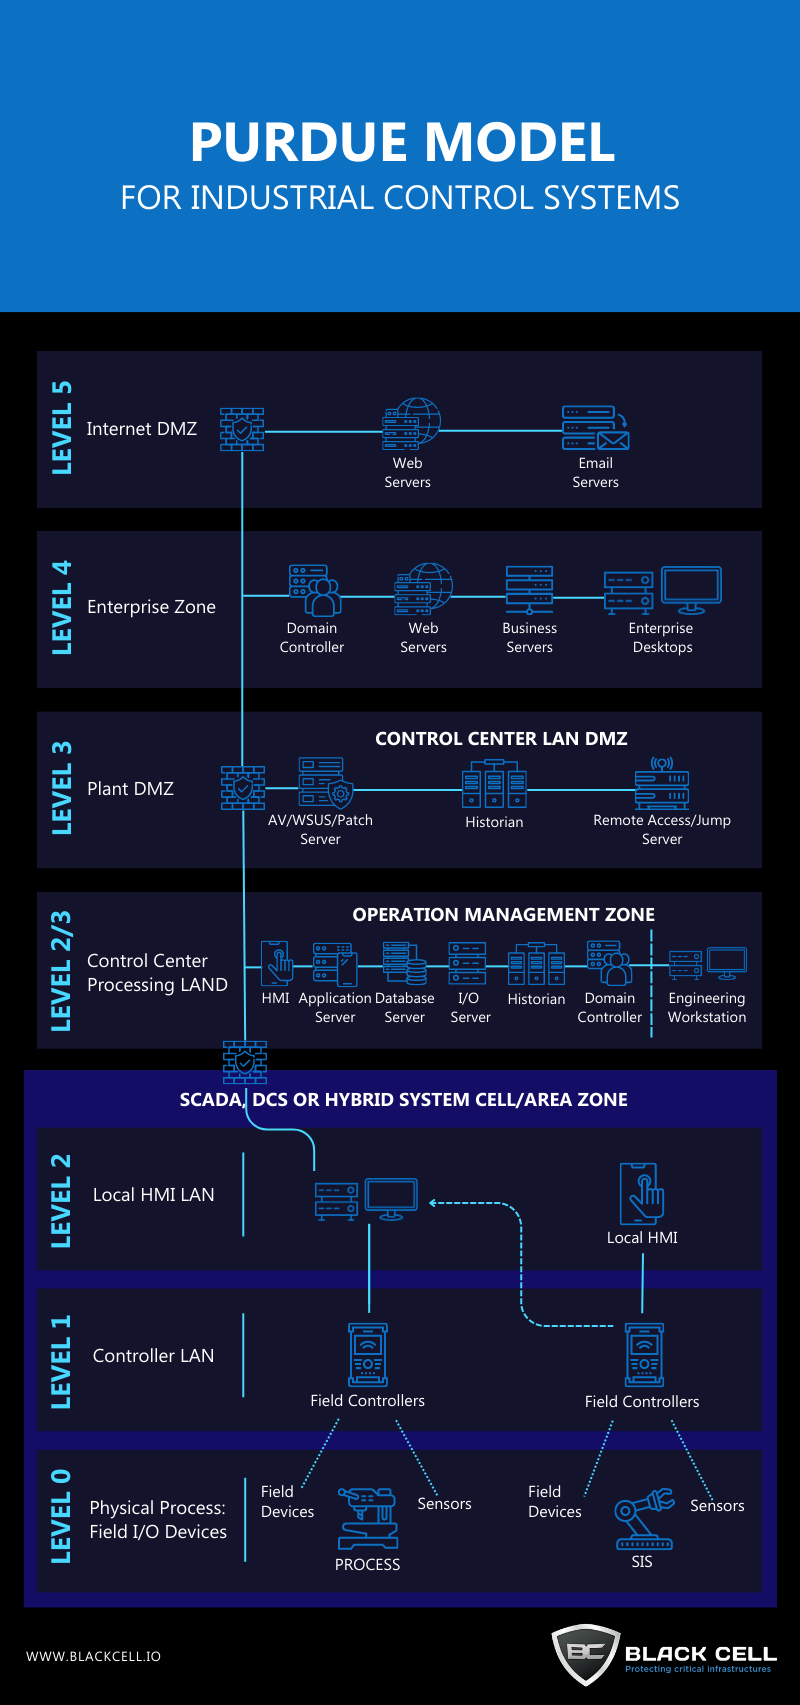 Purdue Model for Industrial Control Systems | Infographic